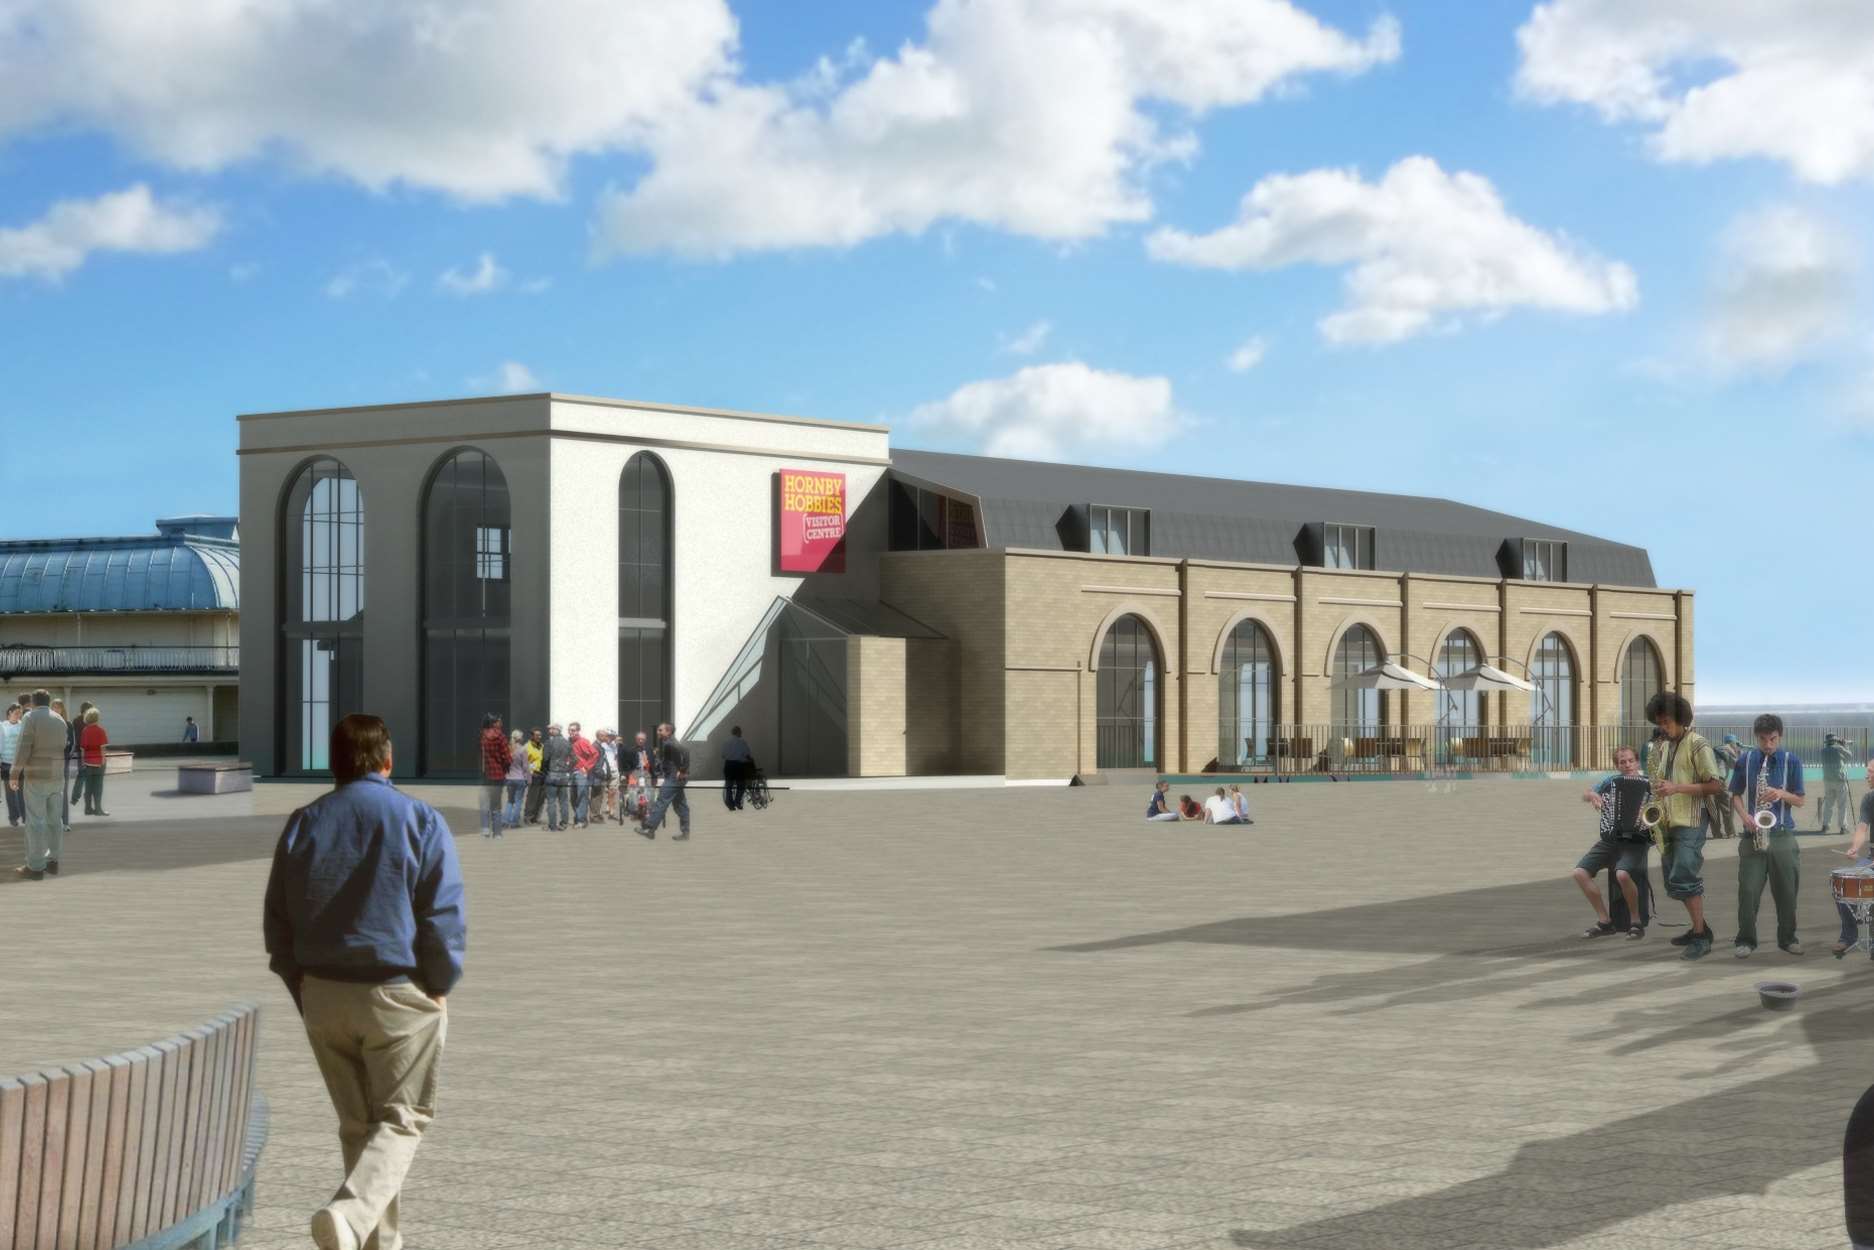 Hornby hopes to move into the new visitor centre in Ramsgate, pictured, by Easter next year